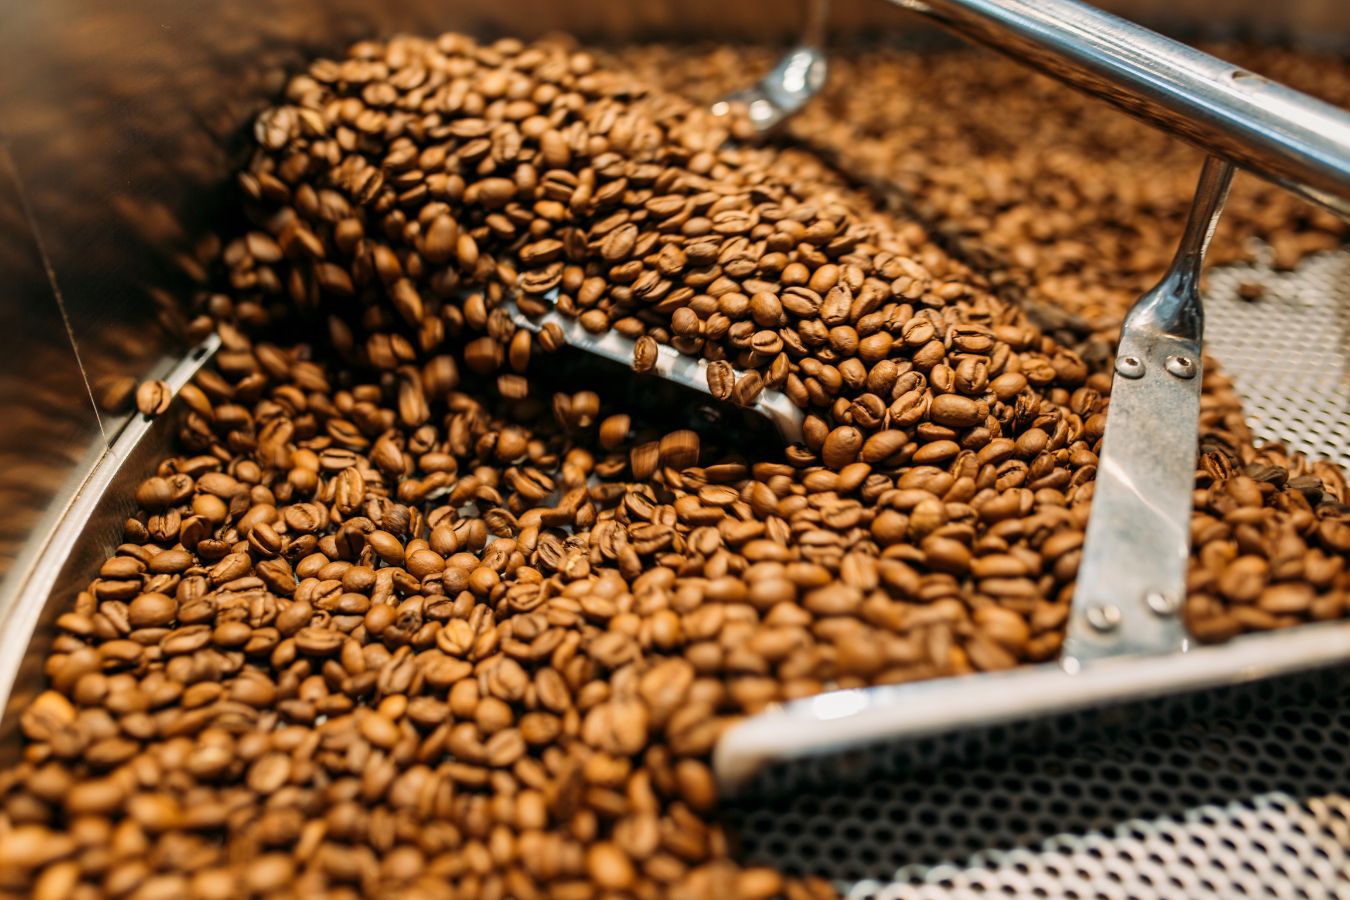 Chemical Changes During Coffee Roasting